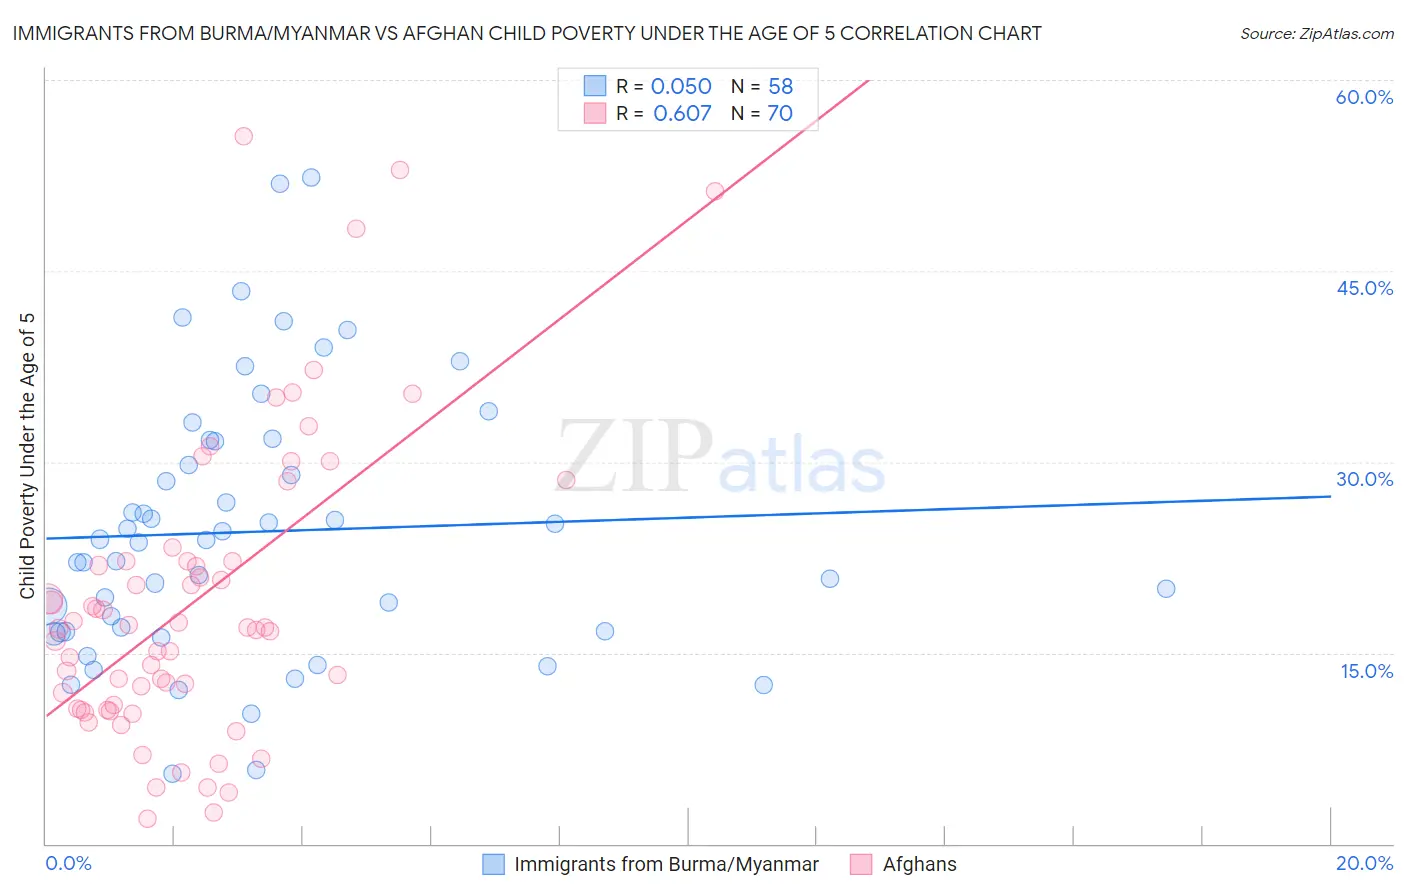 Immigrants from Burma/Myanmar vs Afghan Child Poverty Under the Age of 5